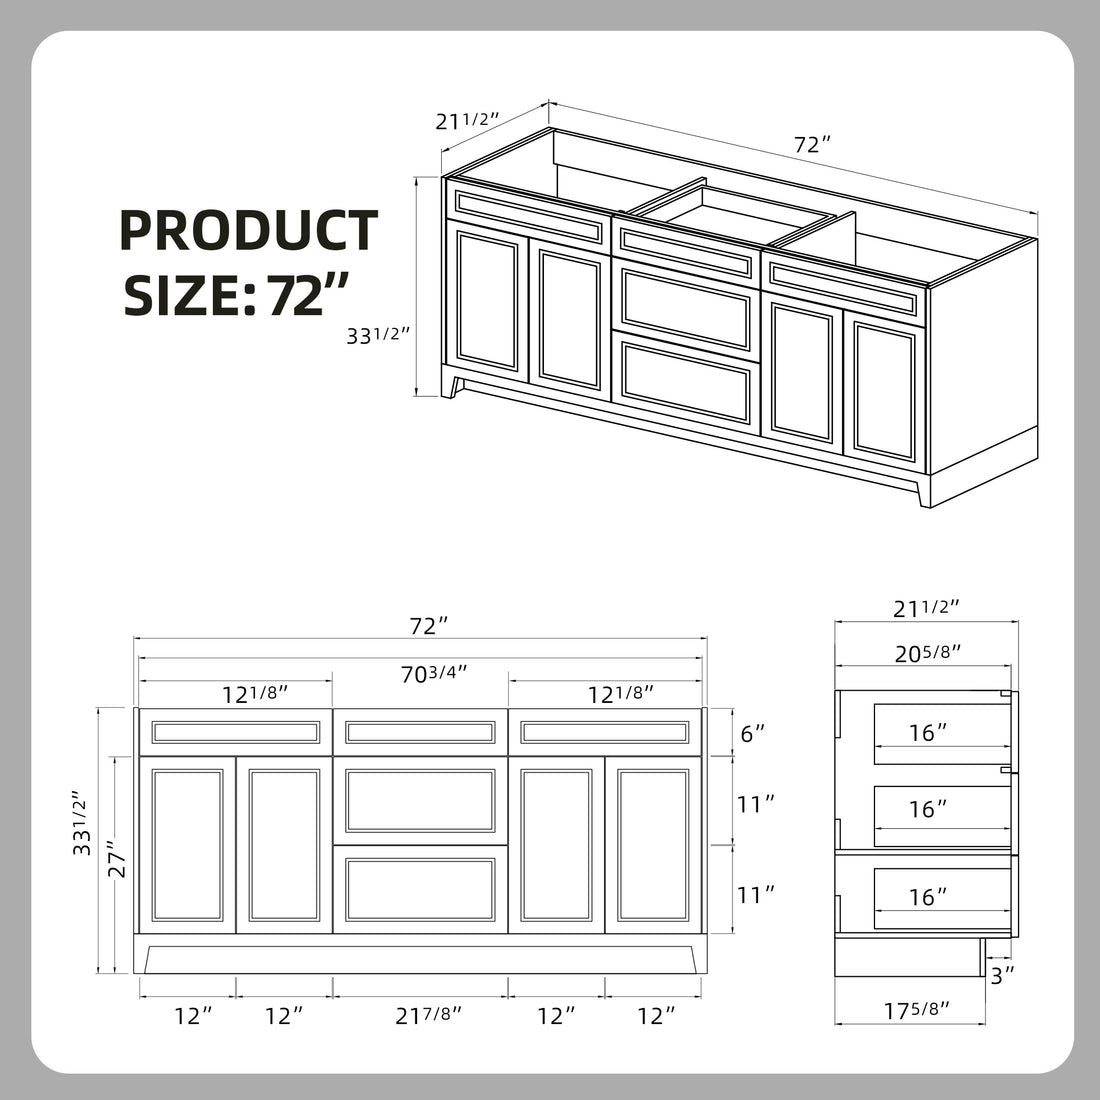 Solid Wood 72 Inch Bathroom Vanity Without Top